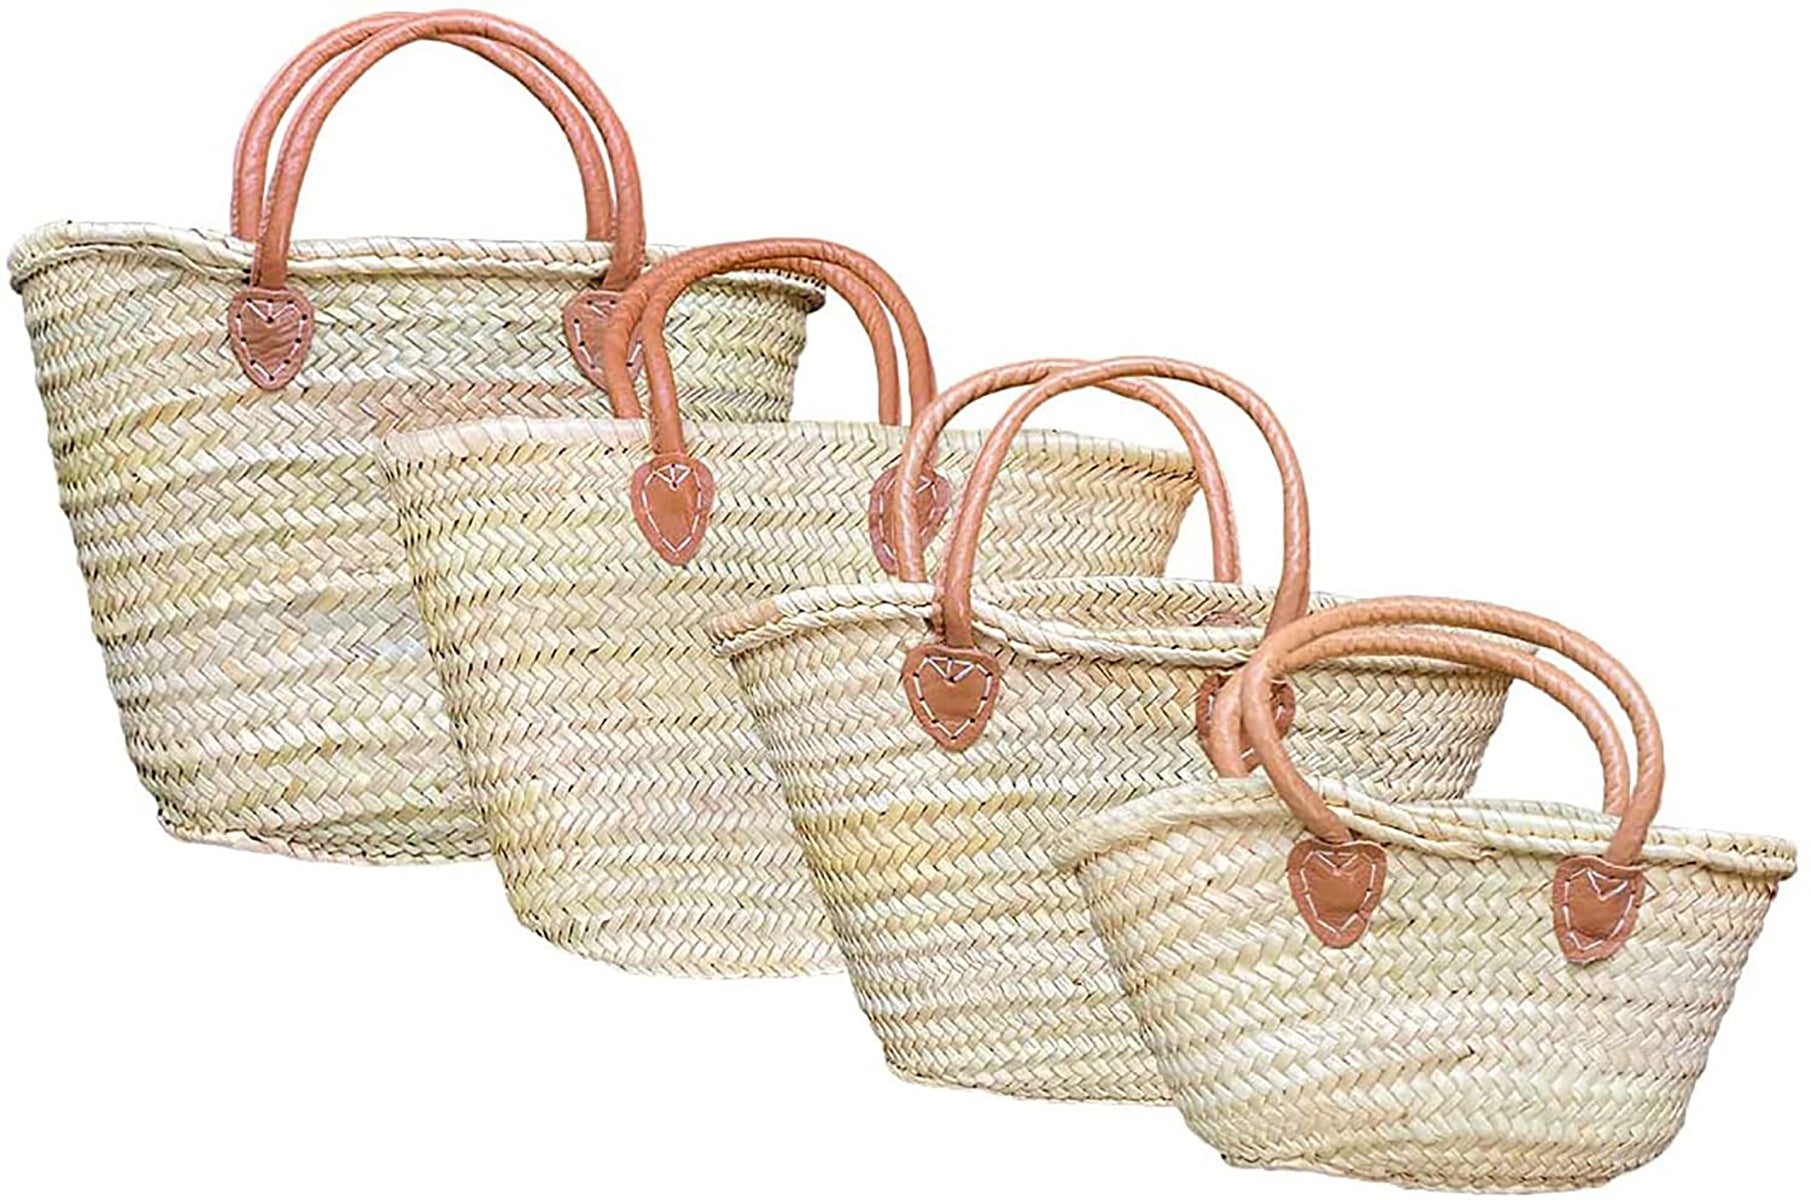 purifyou French Market Basket Bag, Small (14x7) Handmade Moroccan Seagrass  Basket Straw Bags For Sum…See more purifyou French Market Basket Bag, Small